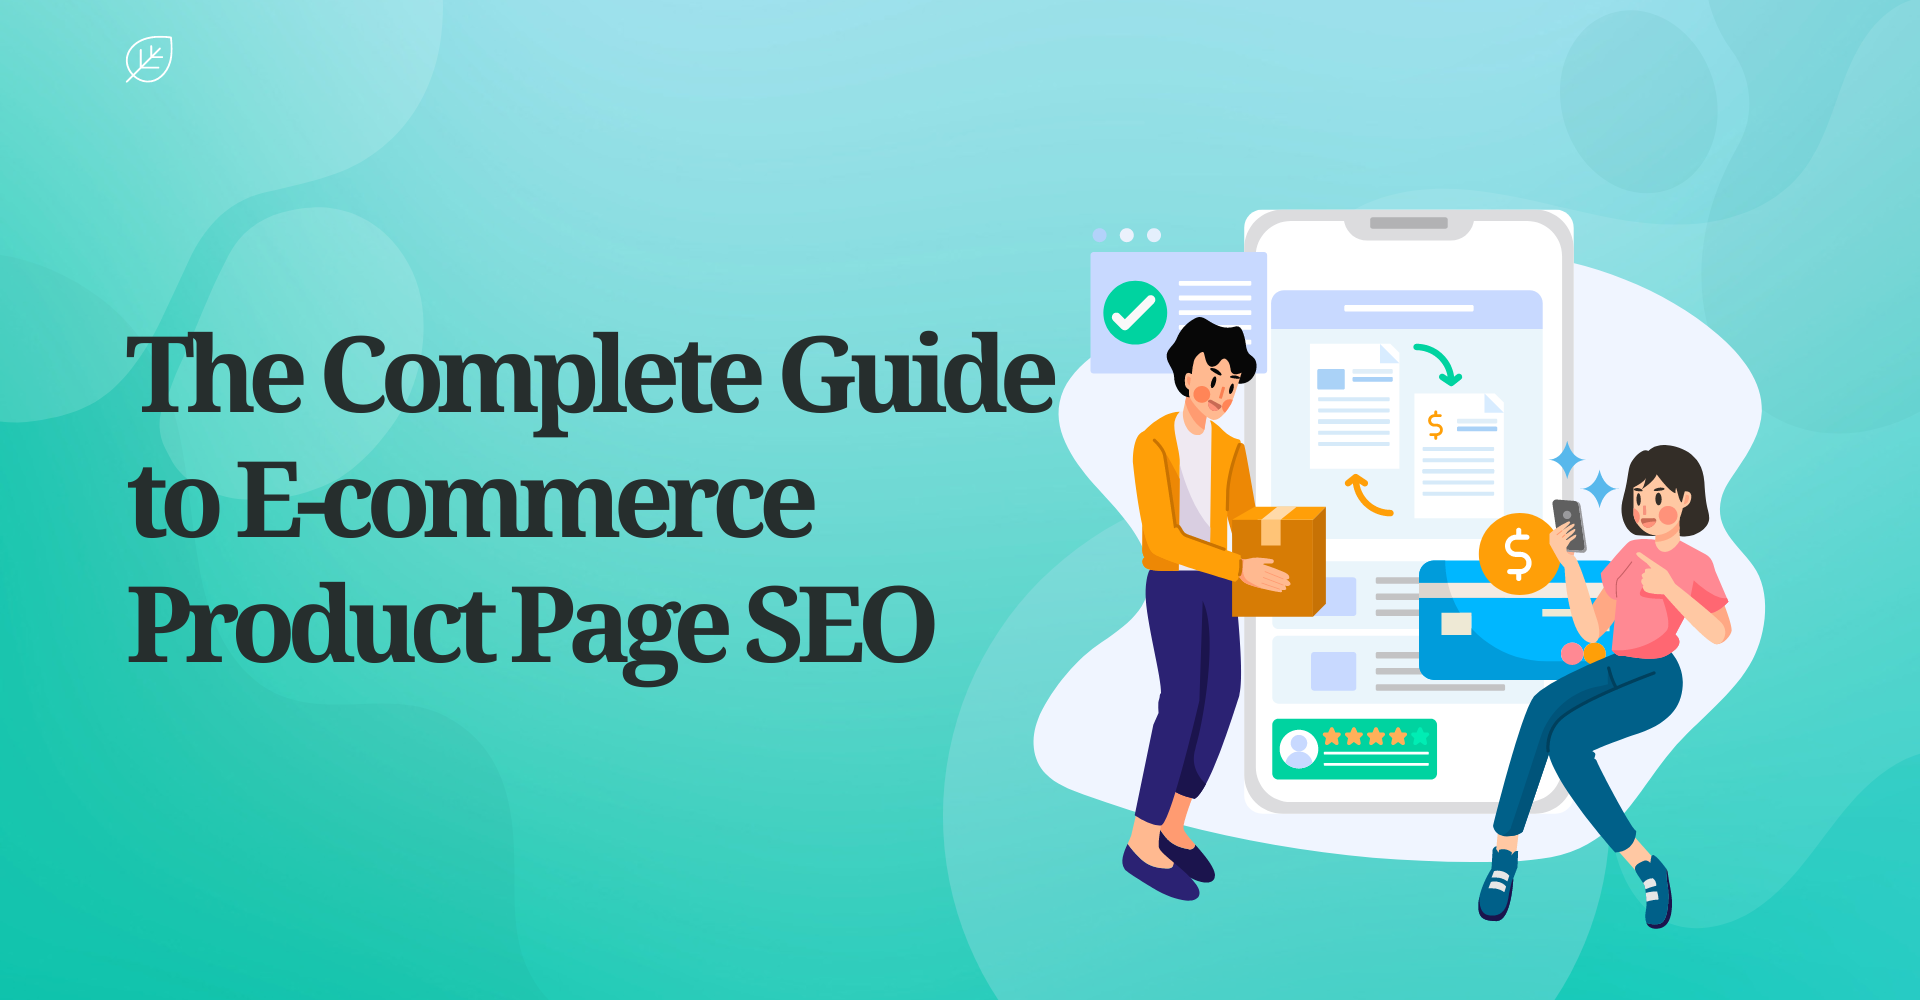 Ecommerce Product Page SEO